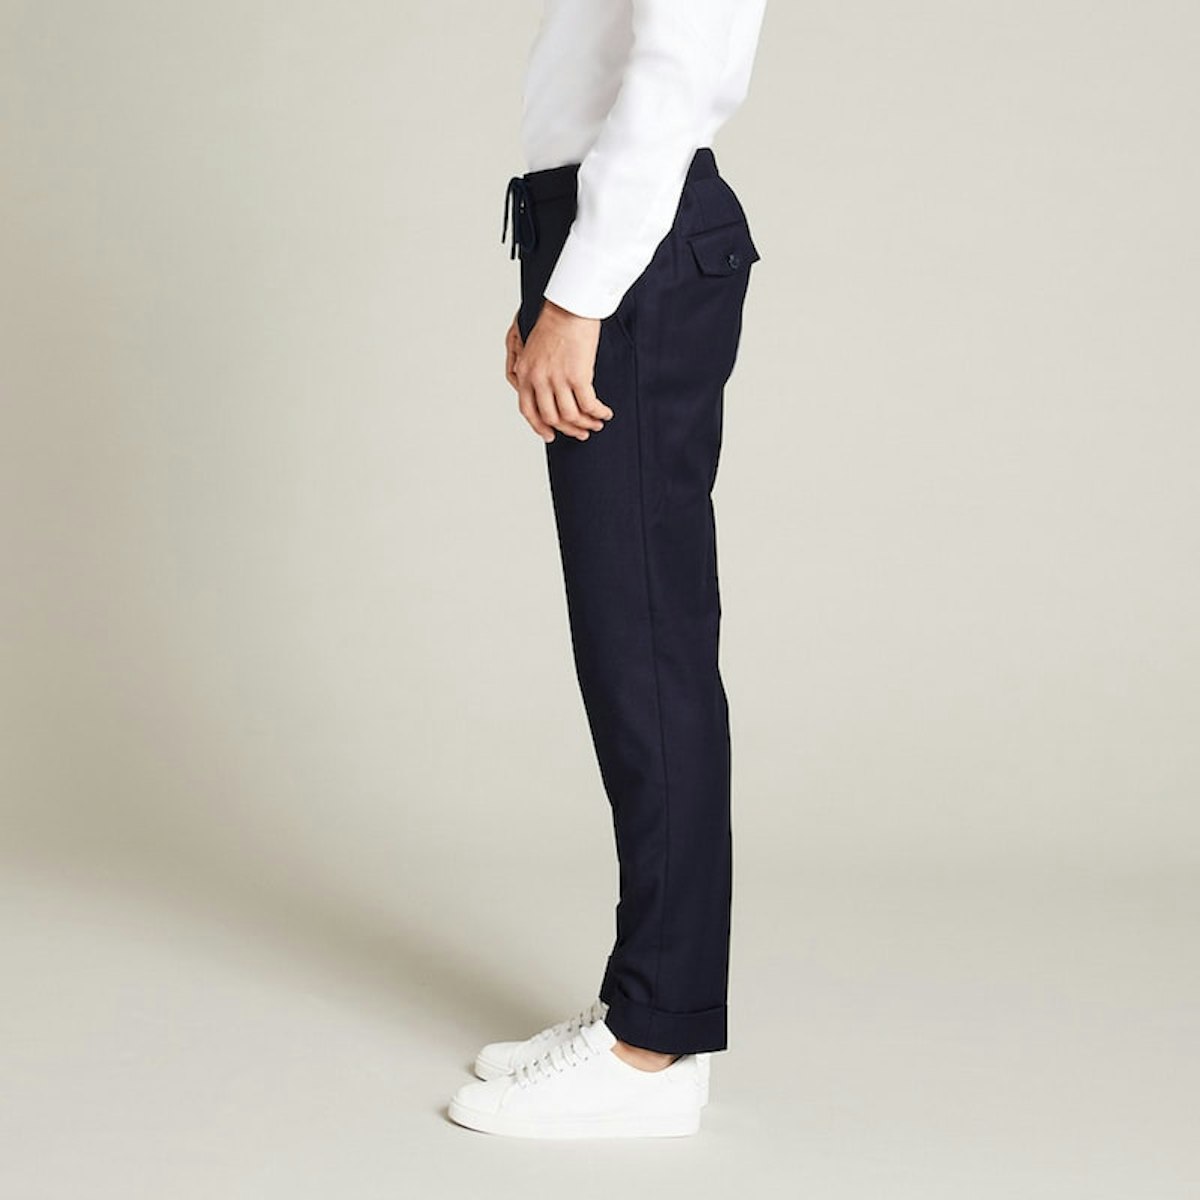 InStitchu Collection The Harrison Navy Flannel Drawstring Pants 